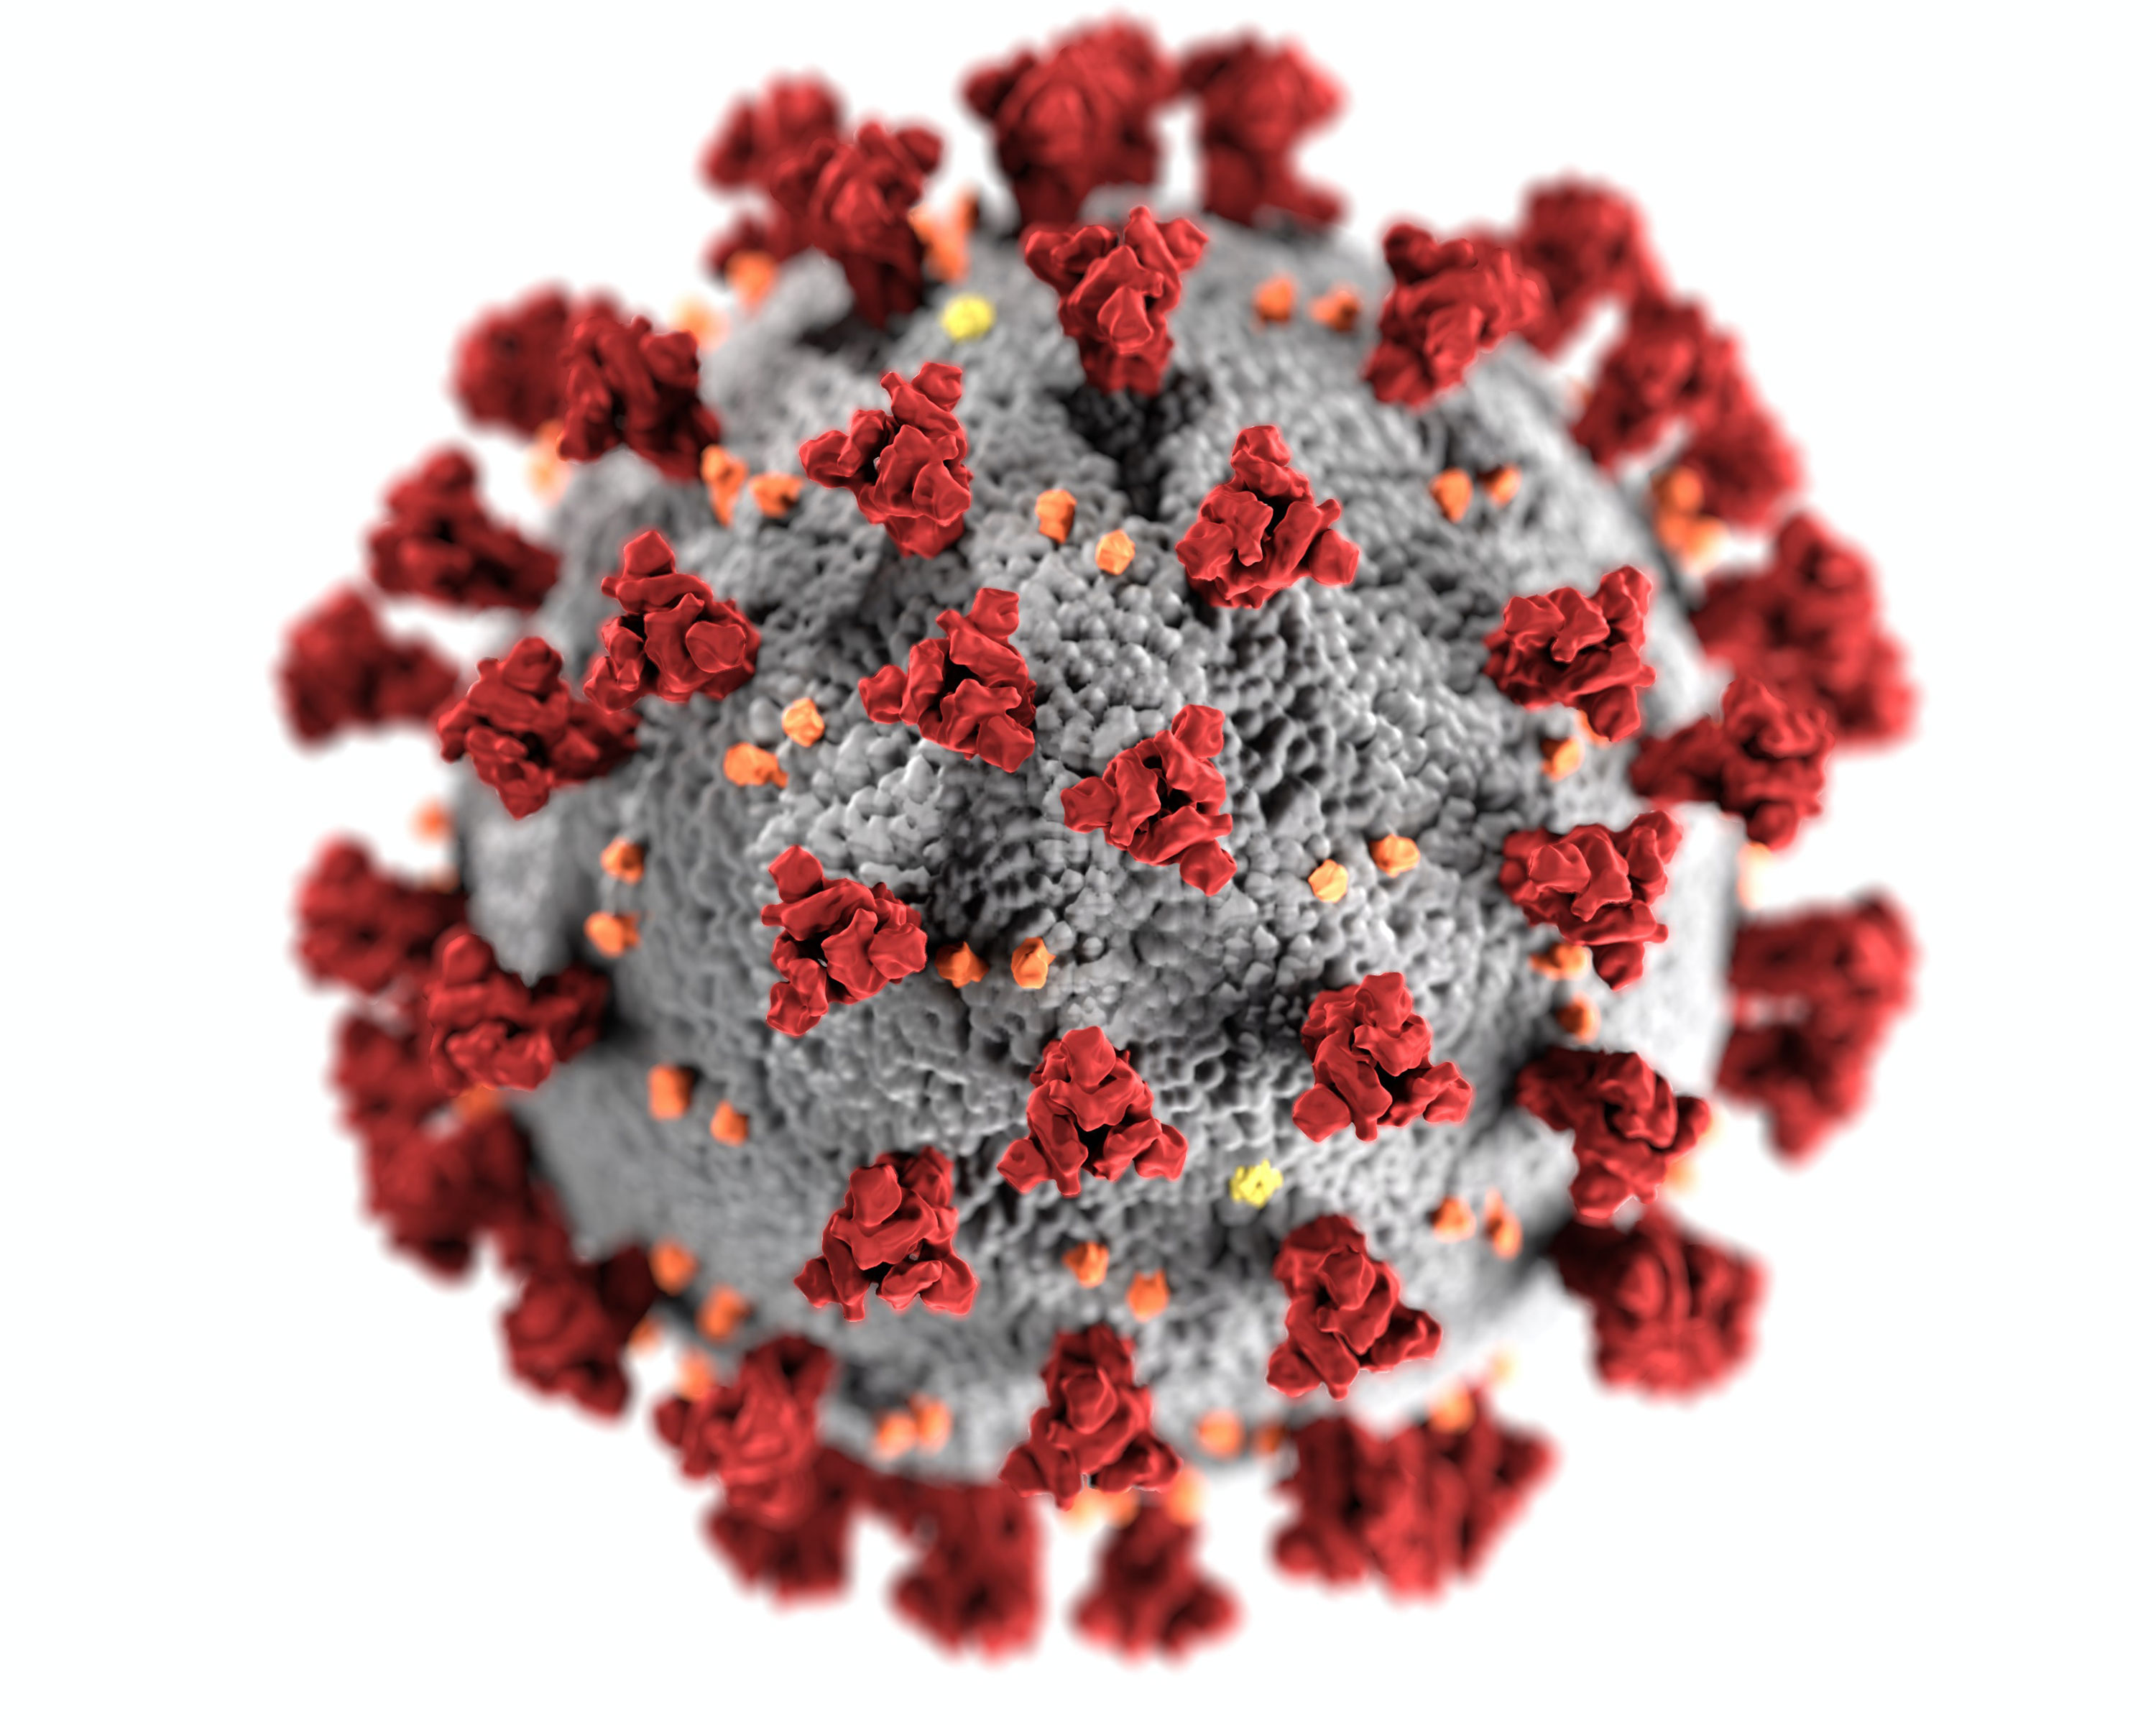 CDC image of covid-19 virus magnified